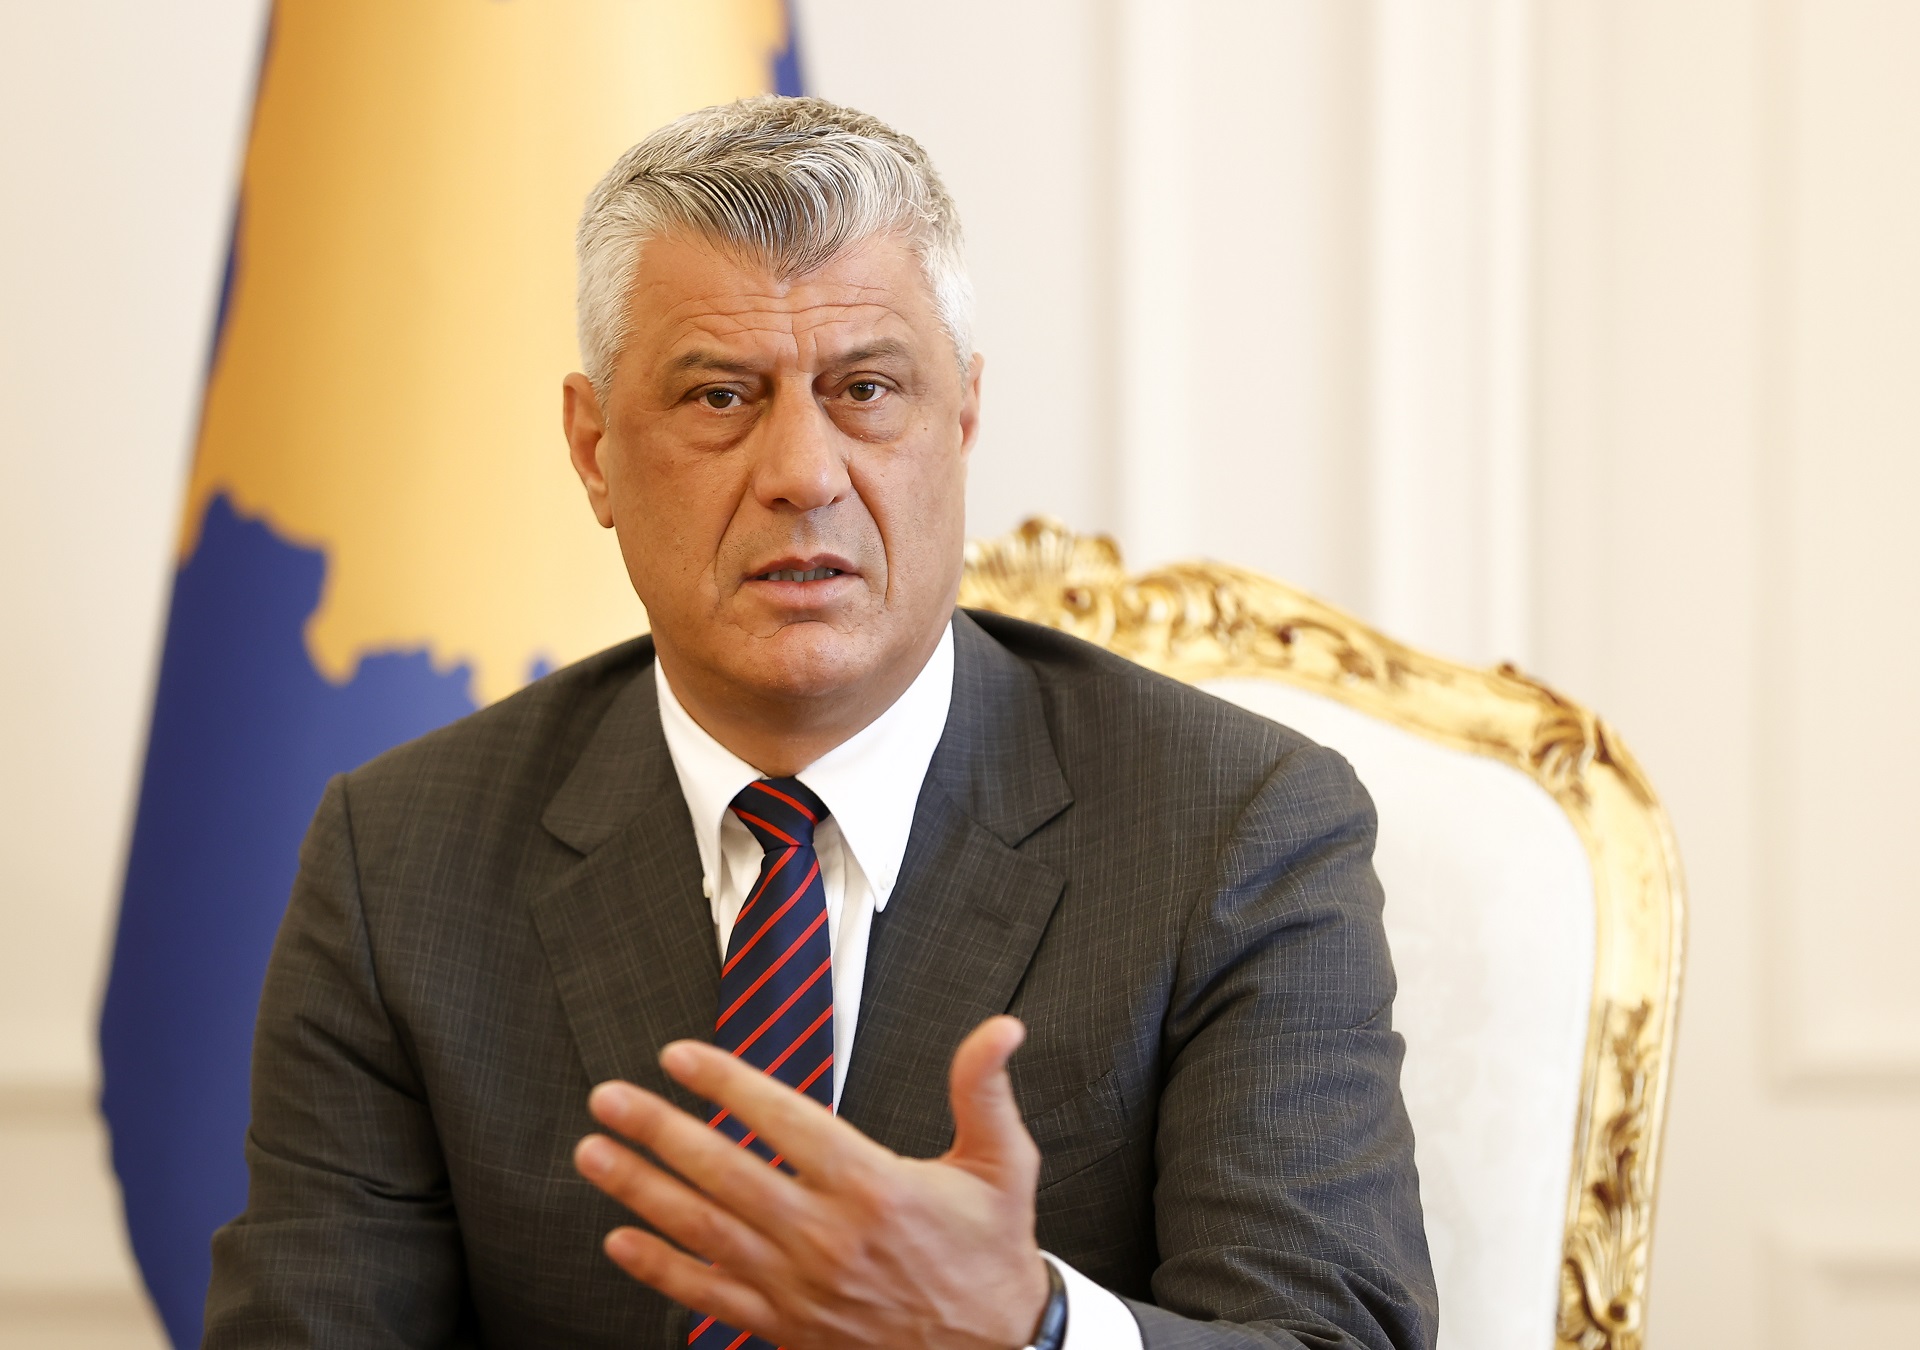 epa08799871 (FILE) - President of the Republic of Kosovo Hashim Thaci talks to media following his meeting with Prime Minister Avdullah Hoti (not pictured) in Pristina, Kosovo, 24 July 2020 (reissued 05 November 2020). According to media reports, Hashim Thaci has resigned after being charged with war crimes.  EPA/VALDRIN XHEMAJ *** Local Caption *** 56418758